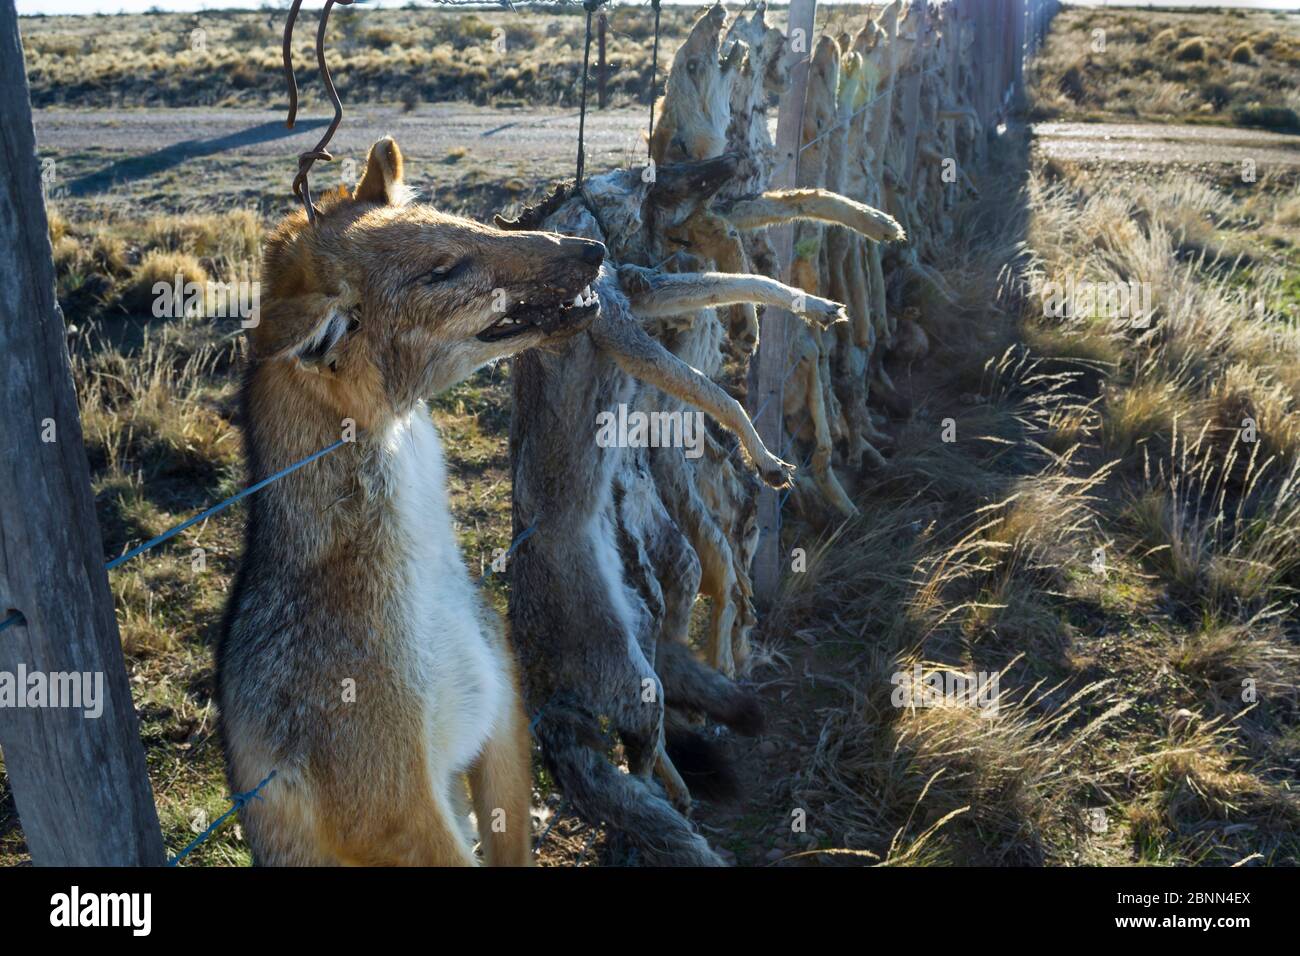 Dead Pampas fox (Lycalopex gymnocercus) Grey fox (Lycalopex culpaeus) and Geffroy's cat (Oncifelis geoffroyi) killed by sheep farmers and hung up to d Stock Photo